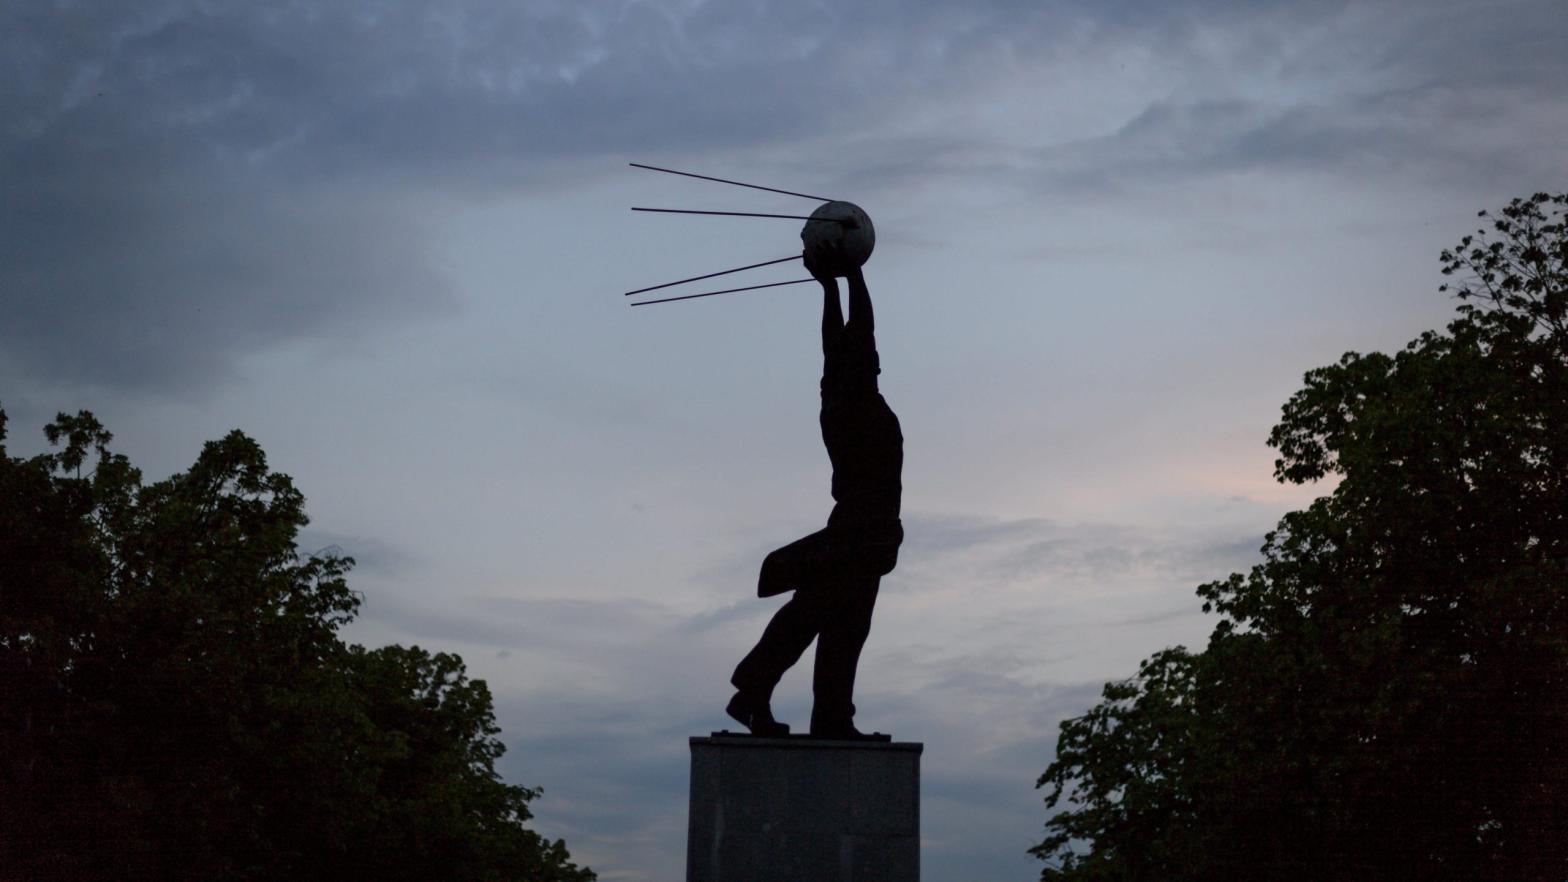 A statue representing a man holding the Sputnik satellite, the namesake of the Sputnik V vaccine, is seen after sunset on June 7, 2018 in Samara, Russia (Photo: Fabrice Coffrini/ AFP, Getty Images)